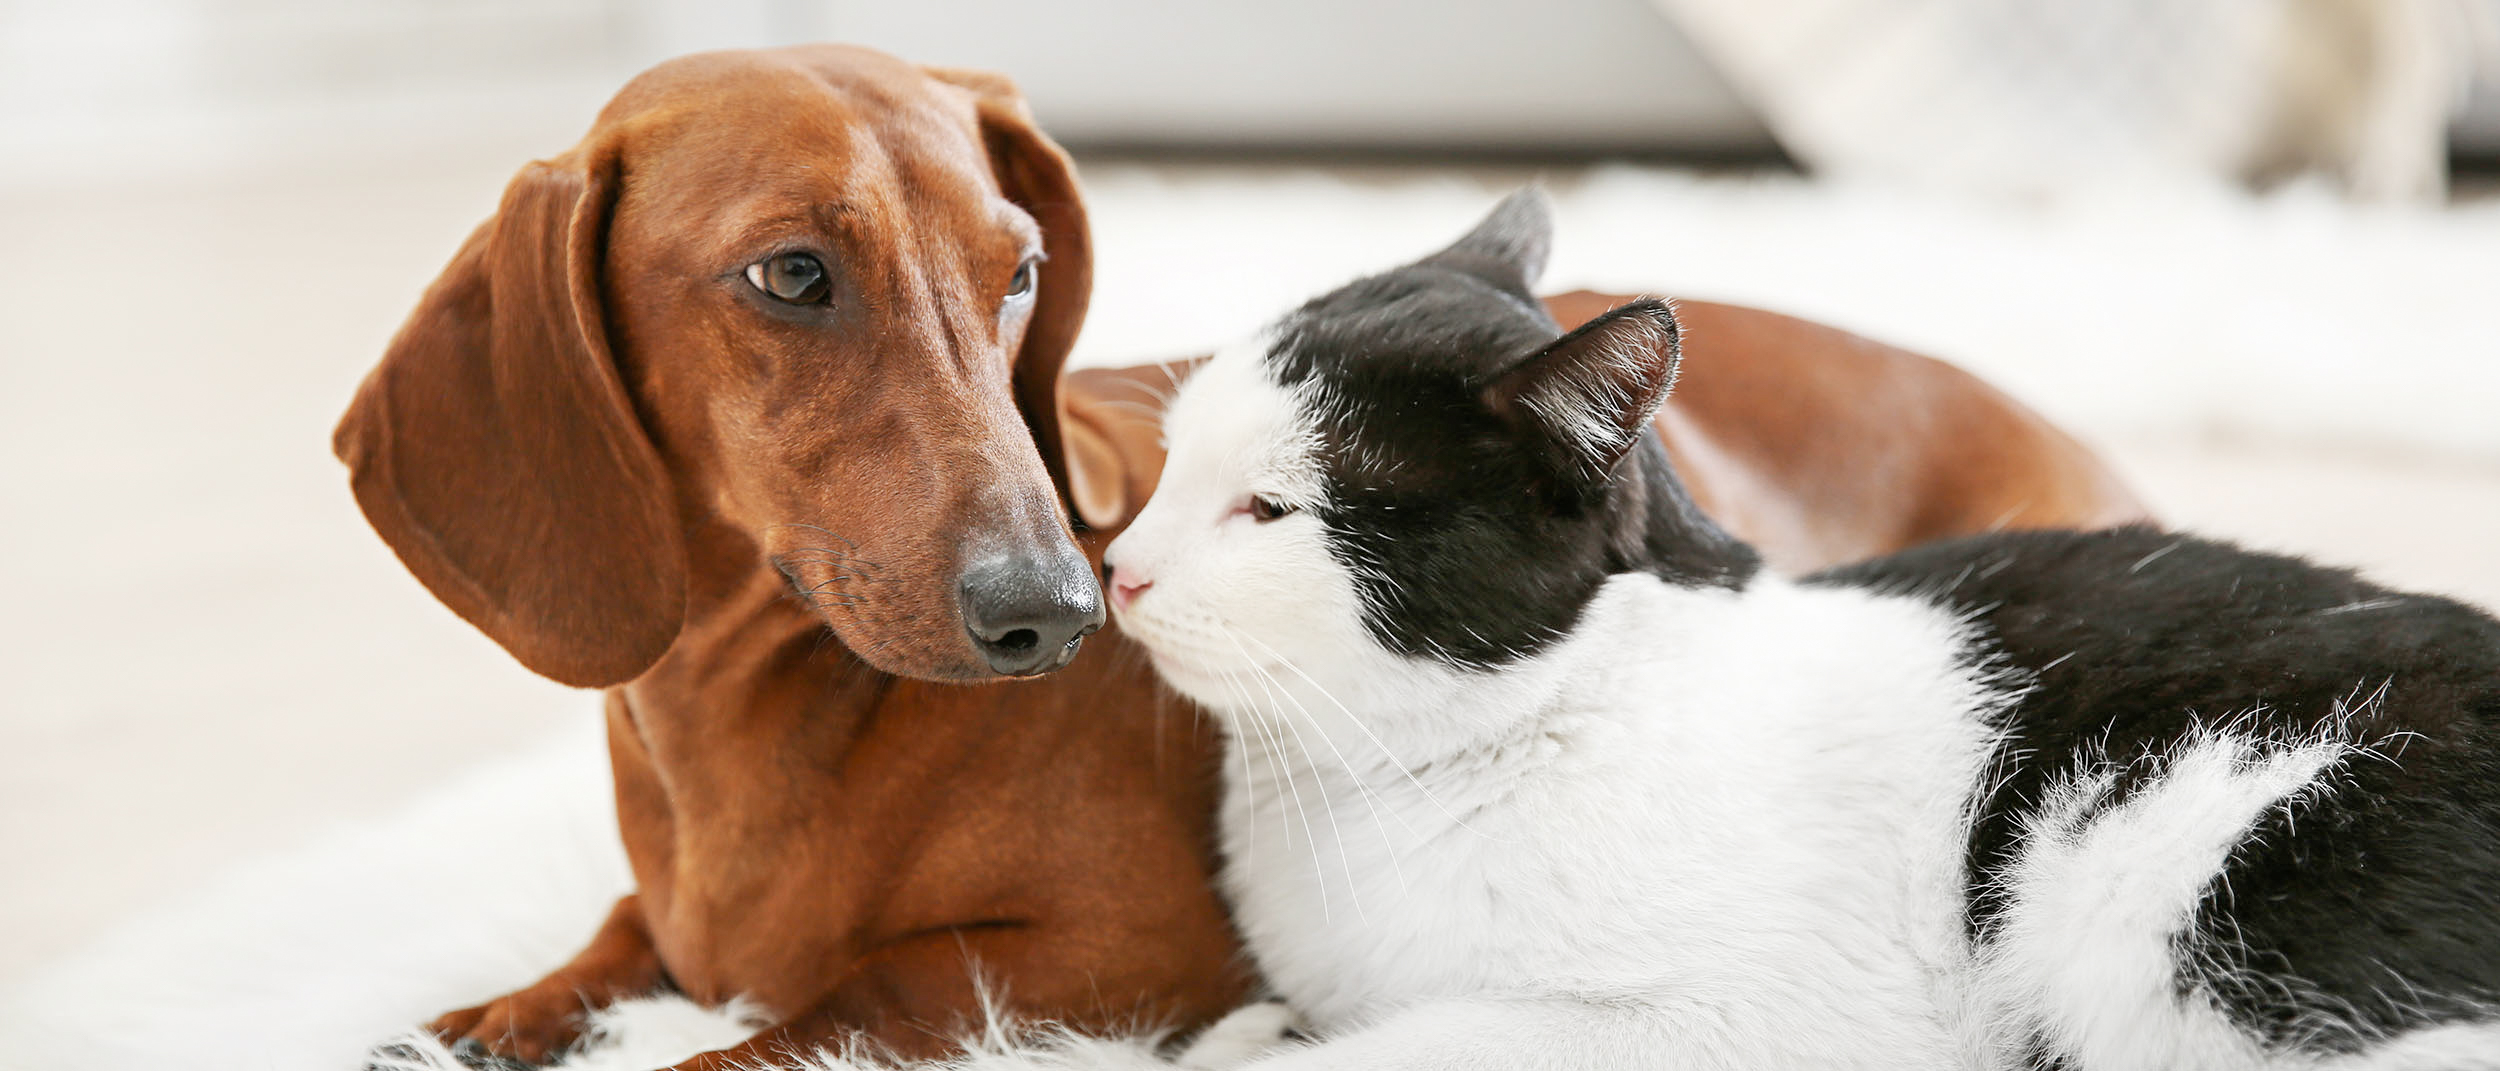 Adult Dachshund lying down on a rug with a black and white cat.